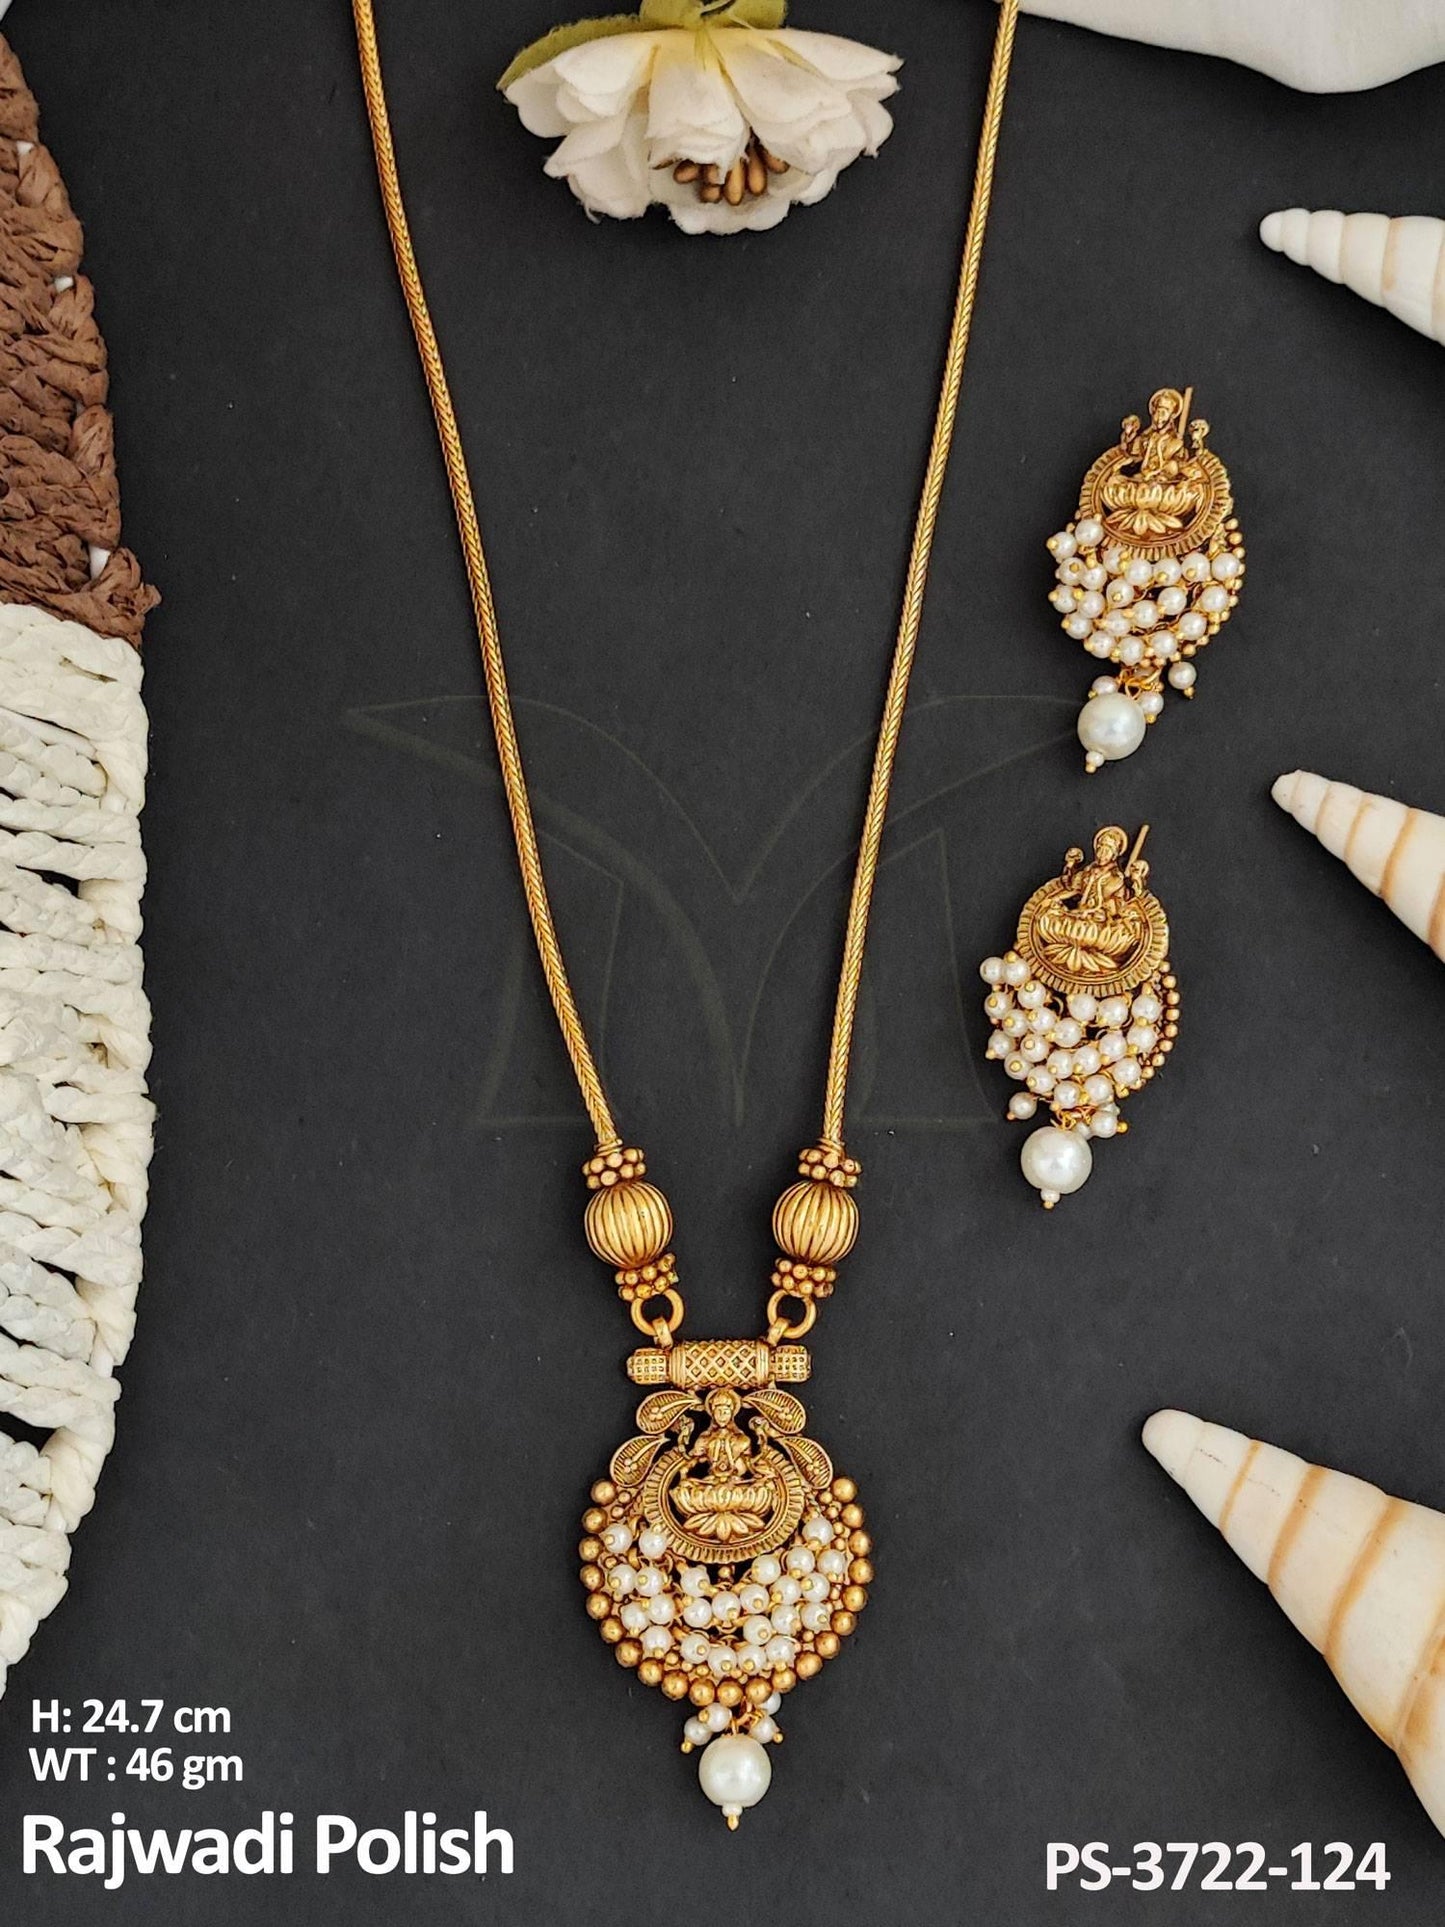 This exquisite Temple Jewellery pendant set boasts a traditional God face design